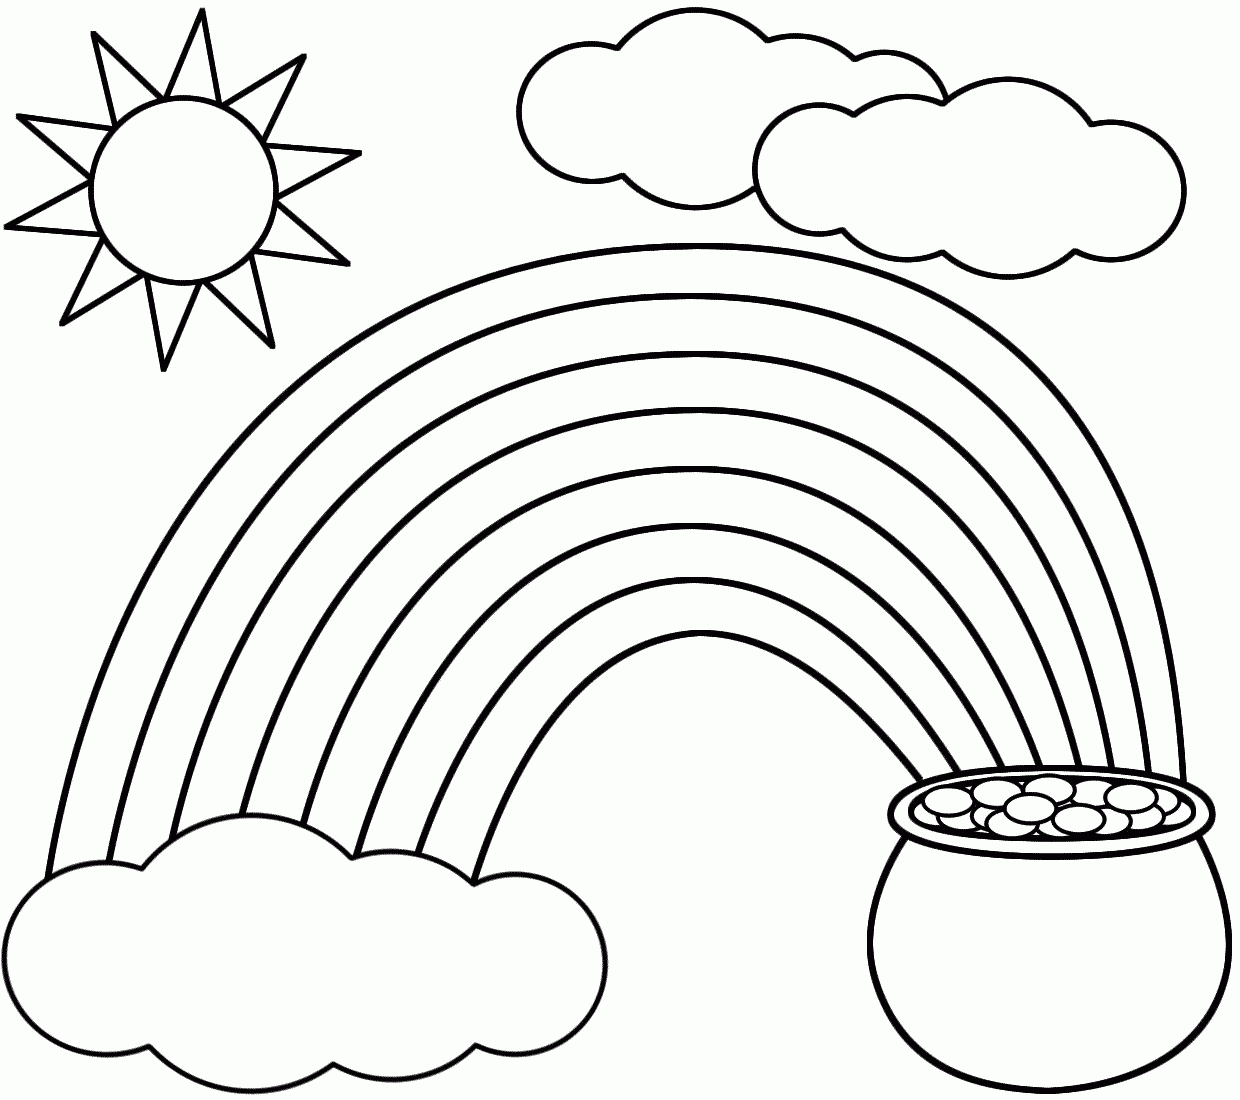 Rainbow Coloring Page ~ Kids Dream Of Rainbows With Pots Of Gold At - Pot Of Gold Template Free Printable